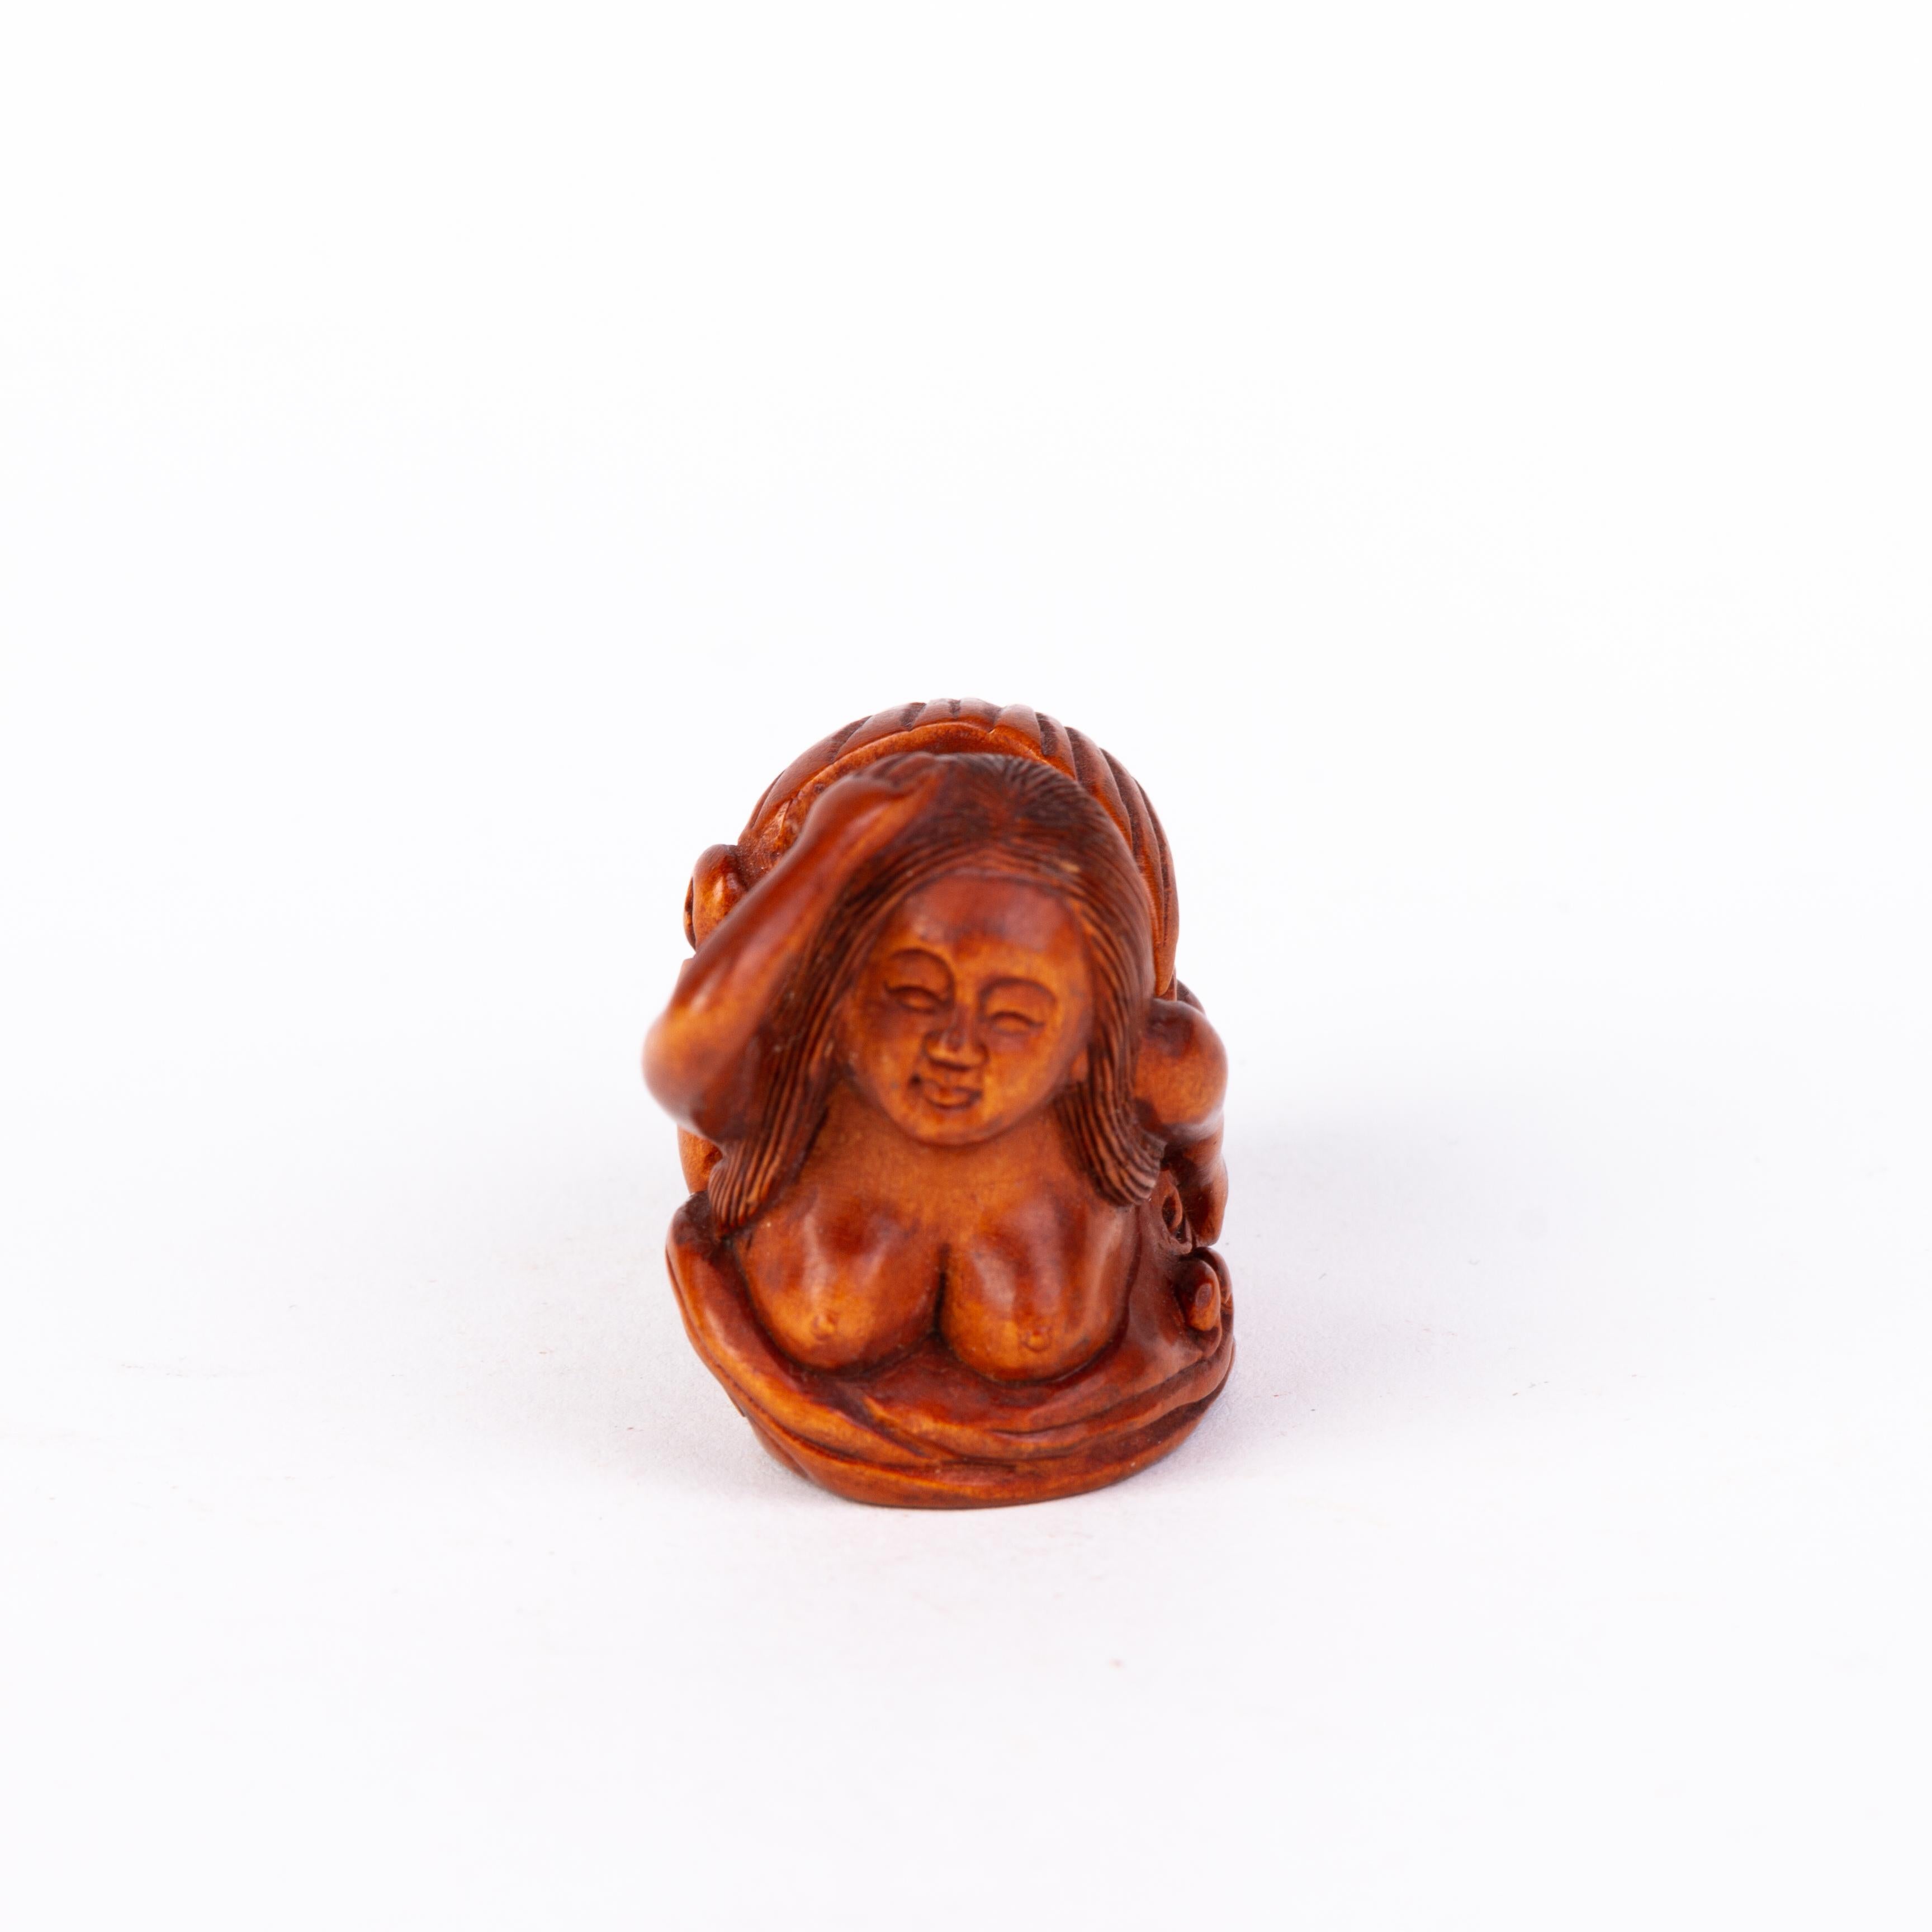 Japanese Carved boxwood Netsuke Inro Ojime, signed
Very good condition.
From a private collection.
Free international shipping.